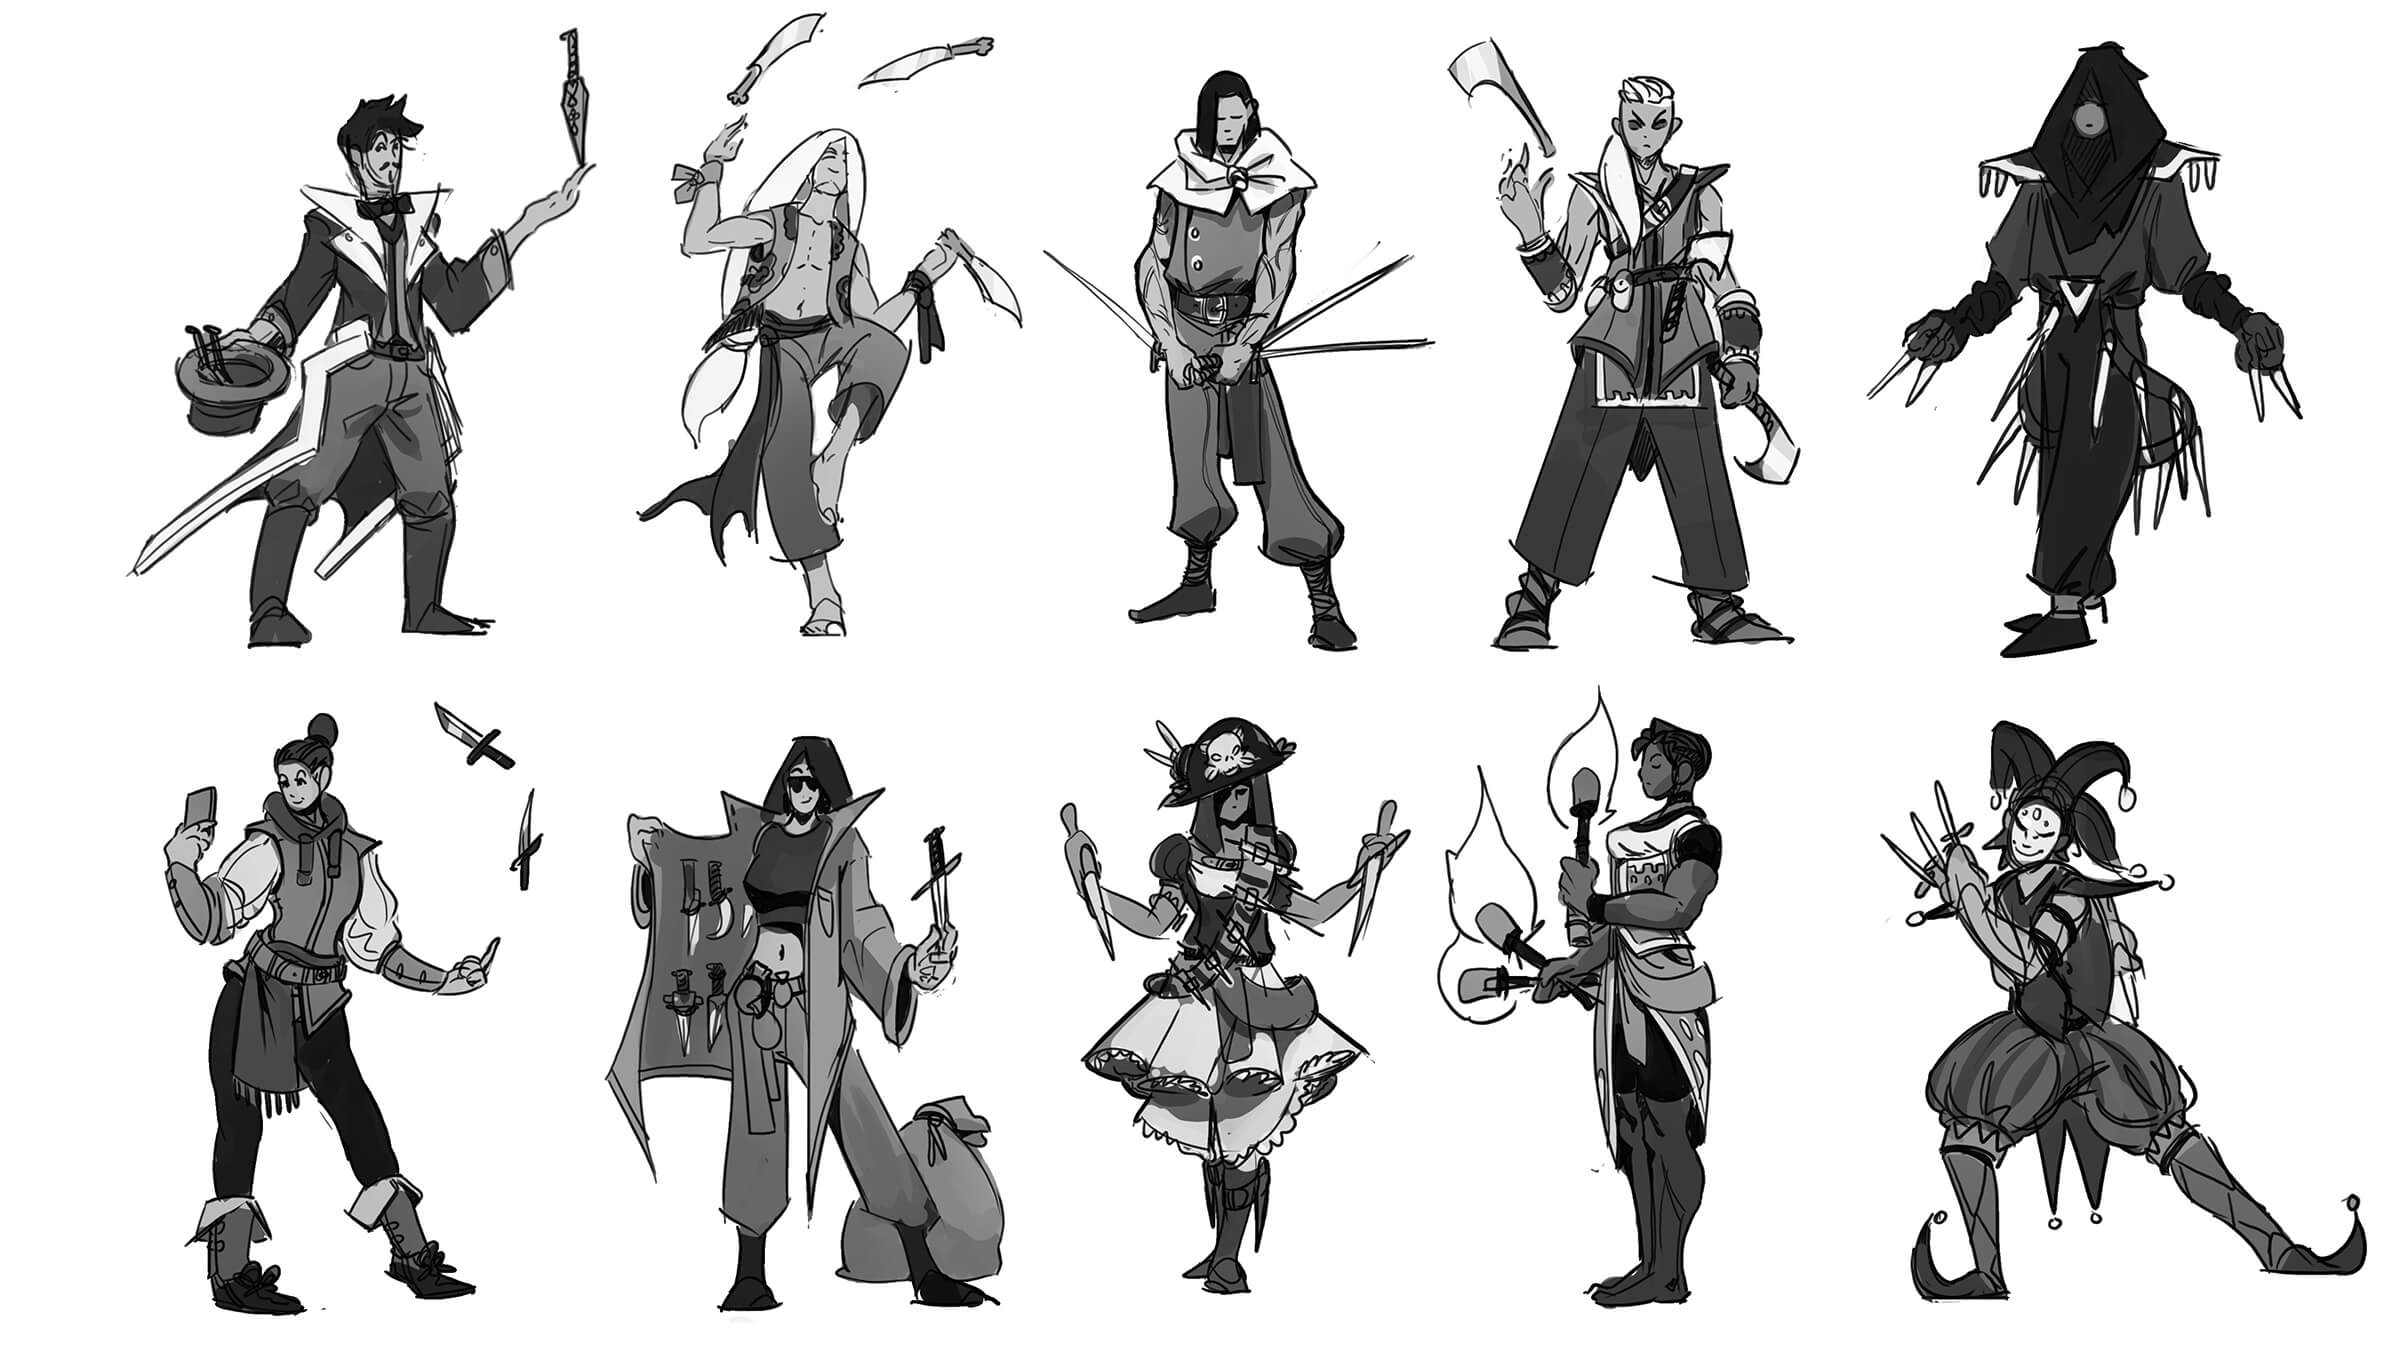 Sketches of various characters using knives and swords